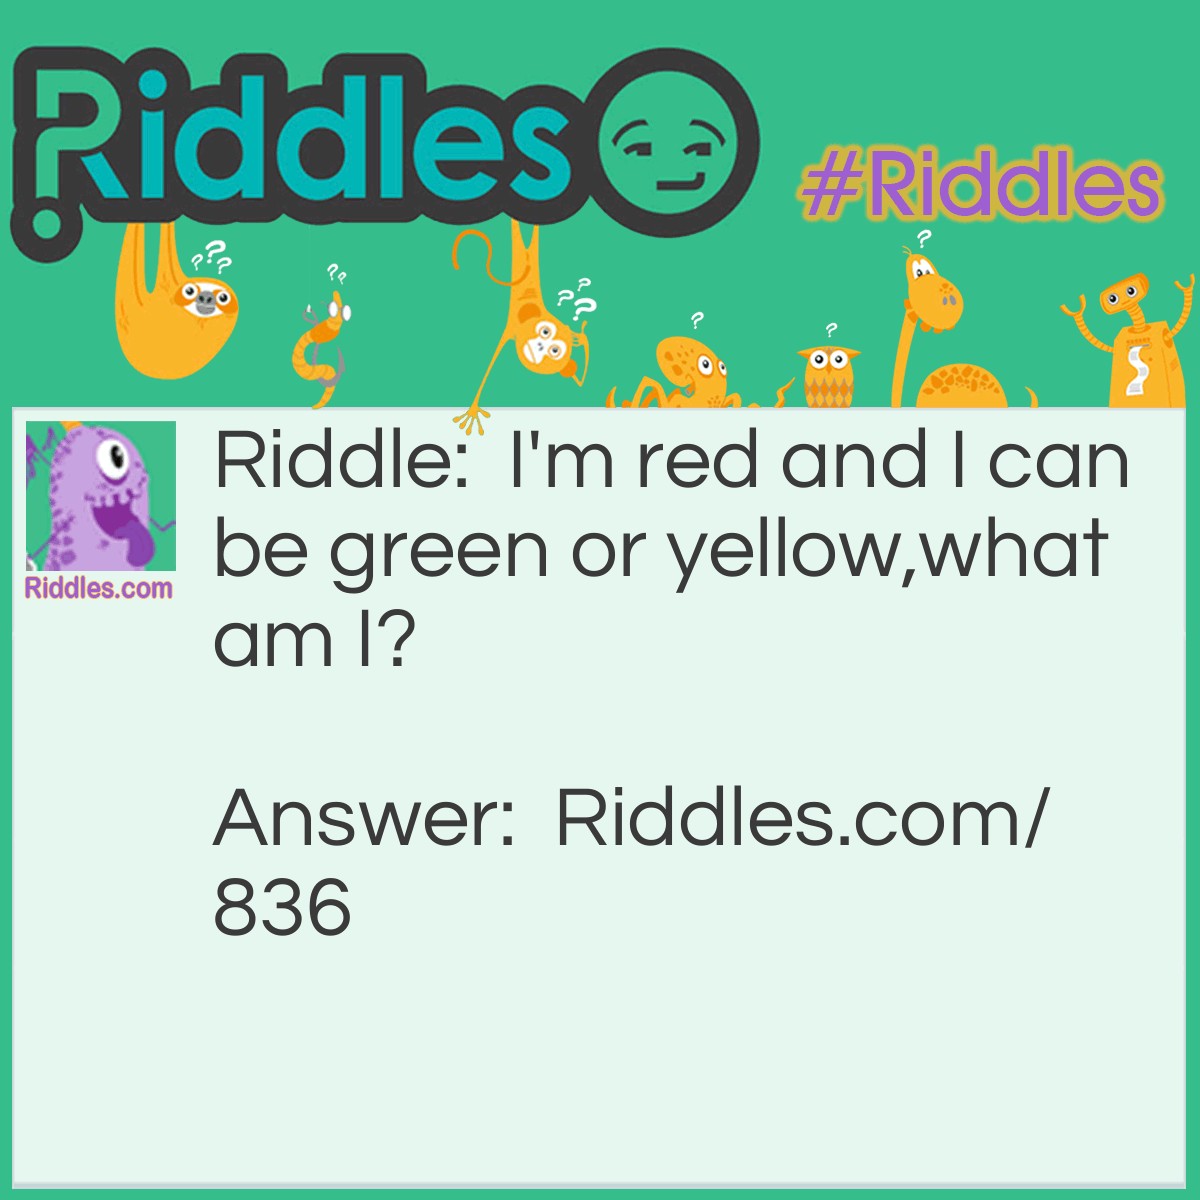 Riddle: I'm red and I can be green or yellow,
what am I? Answer: An apple.